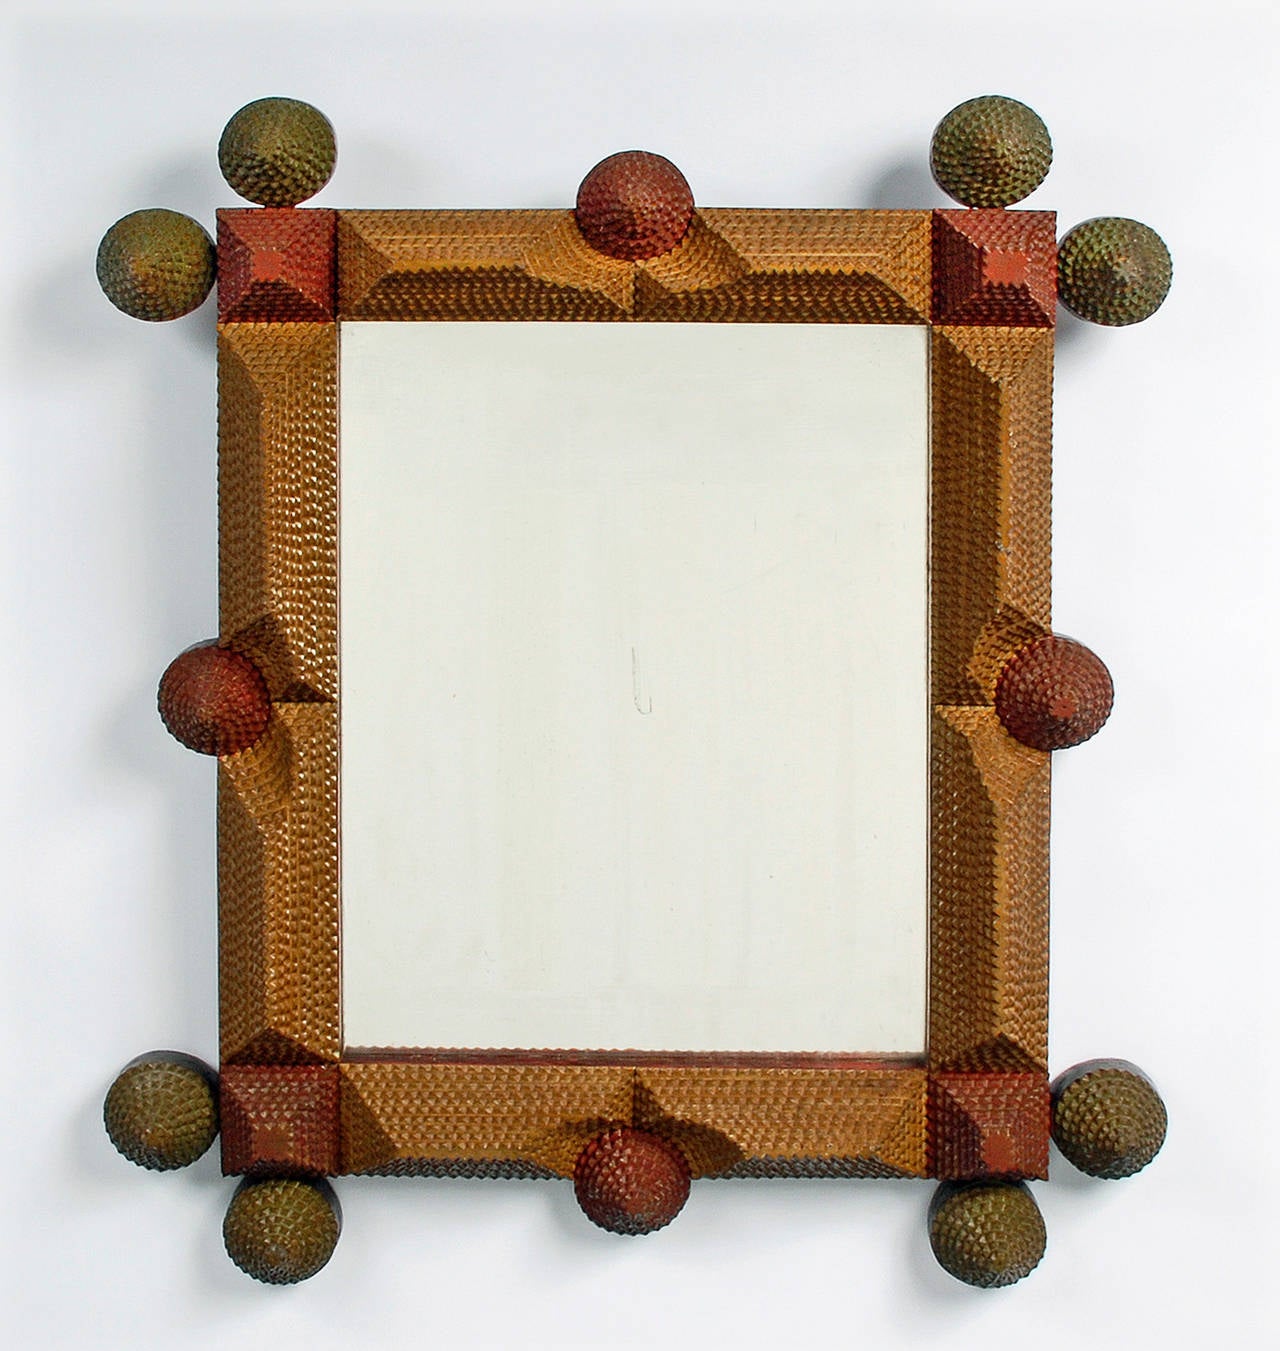 A whimsical Tramp Art mirror with an original three color painted surface. With playful rosette extensions, circa 1910.